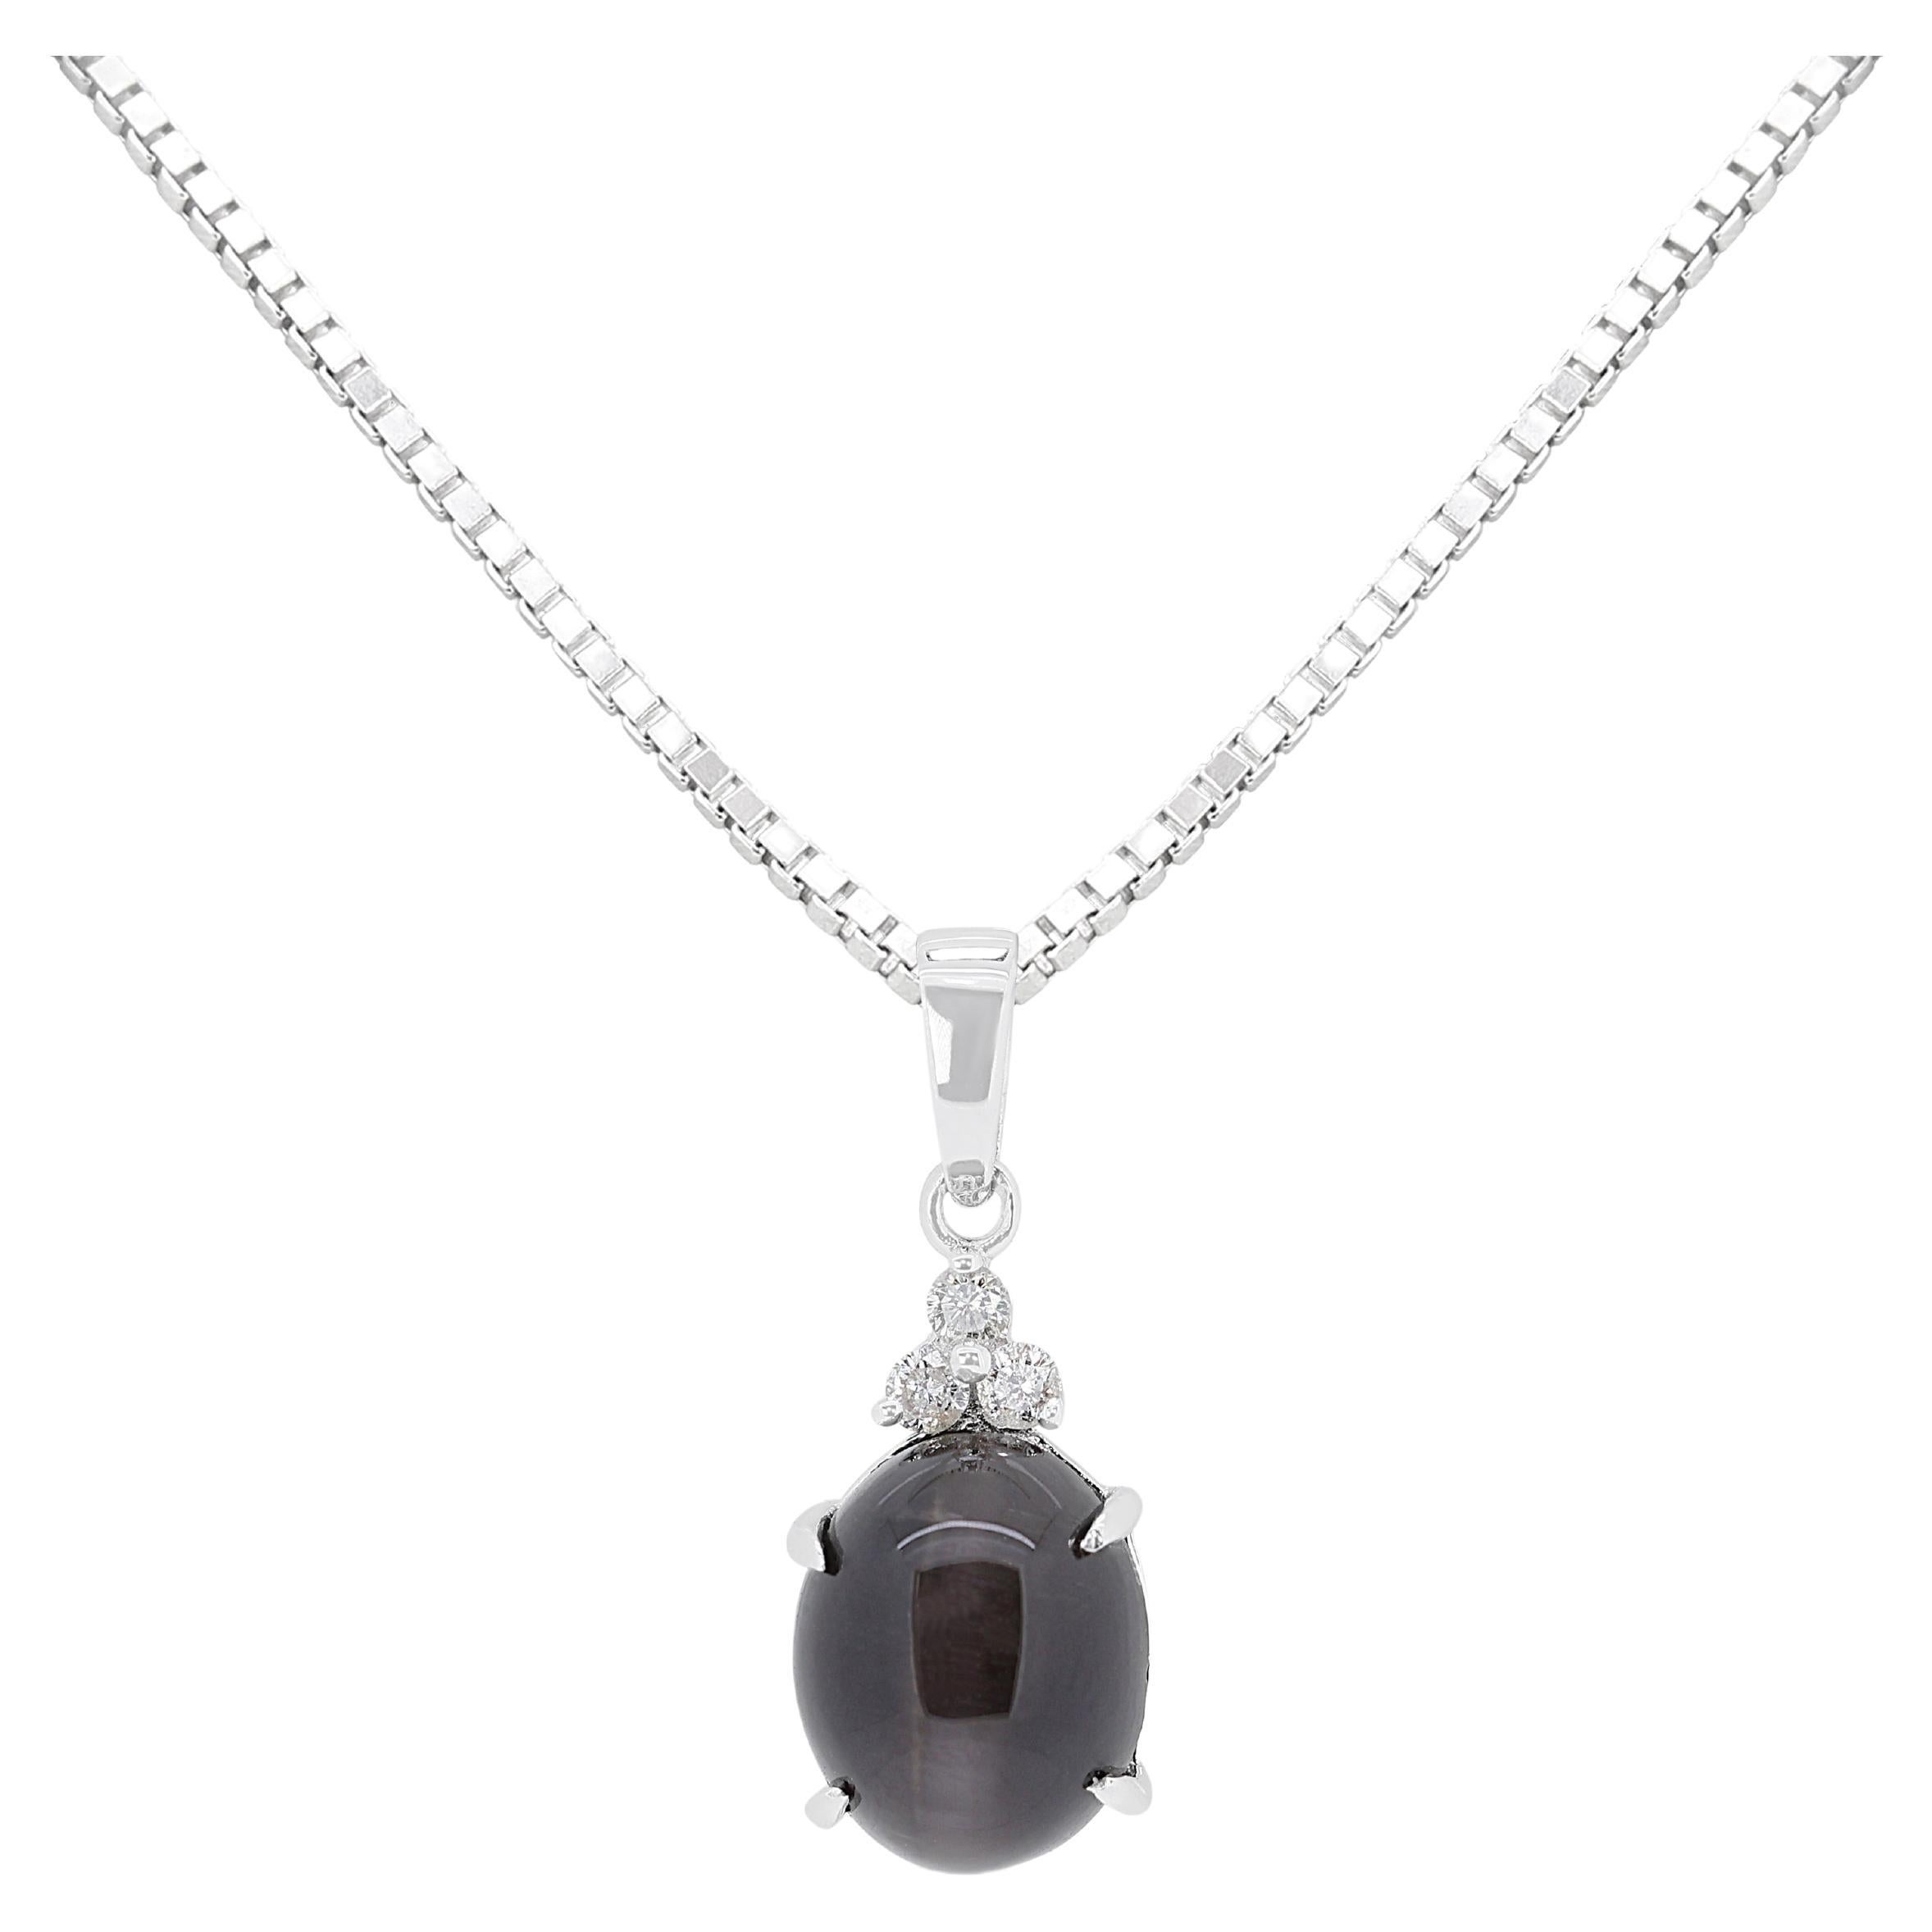 Majestic 4.83ct Cat Eye Pendant w/ Diamonds in 18K White Gold-Chain Not Included For Sale